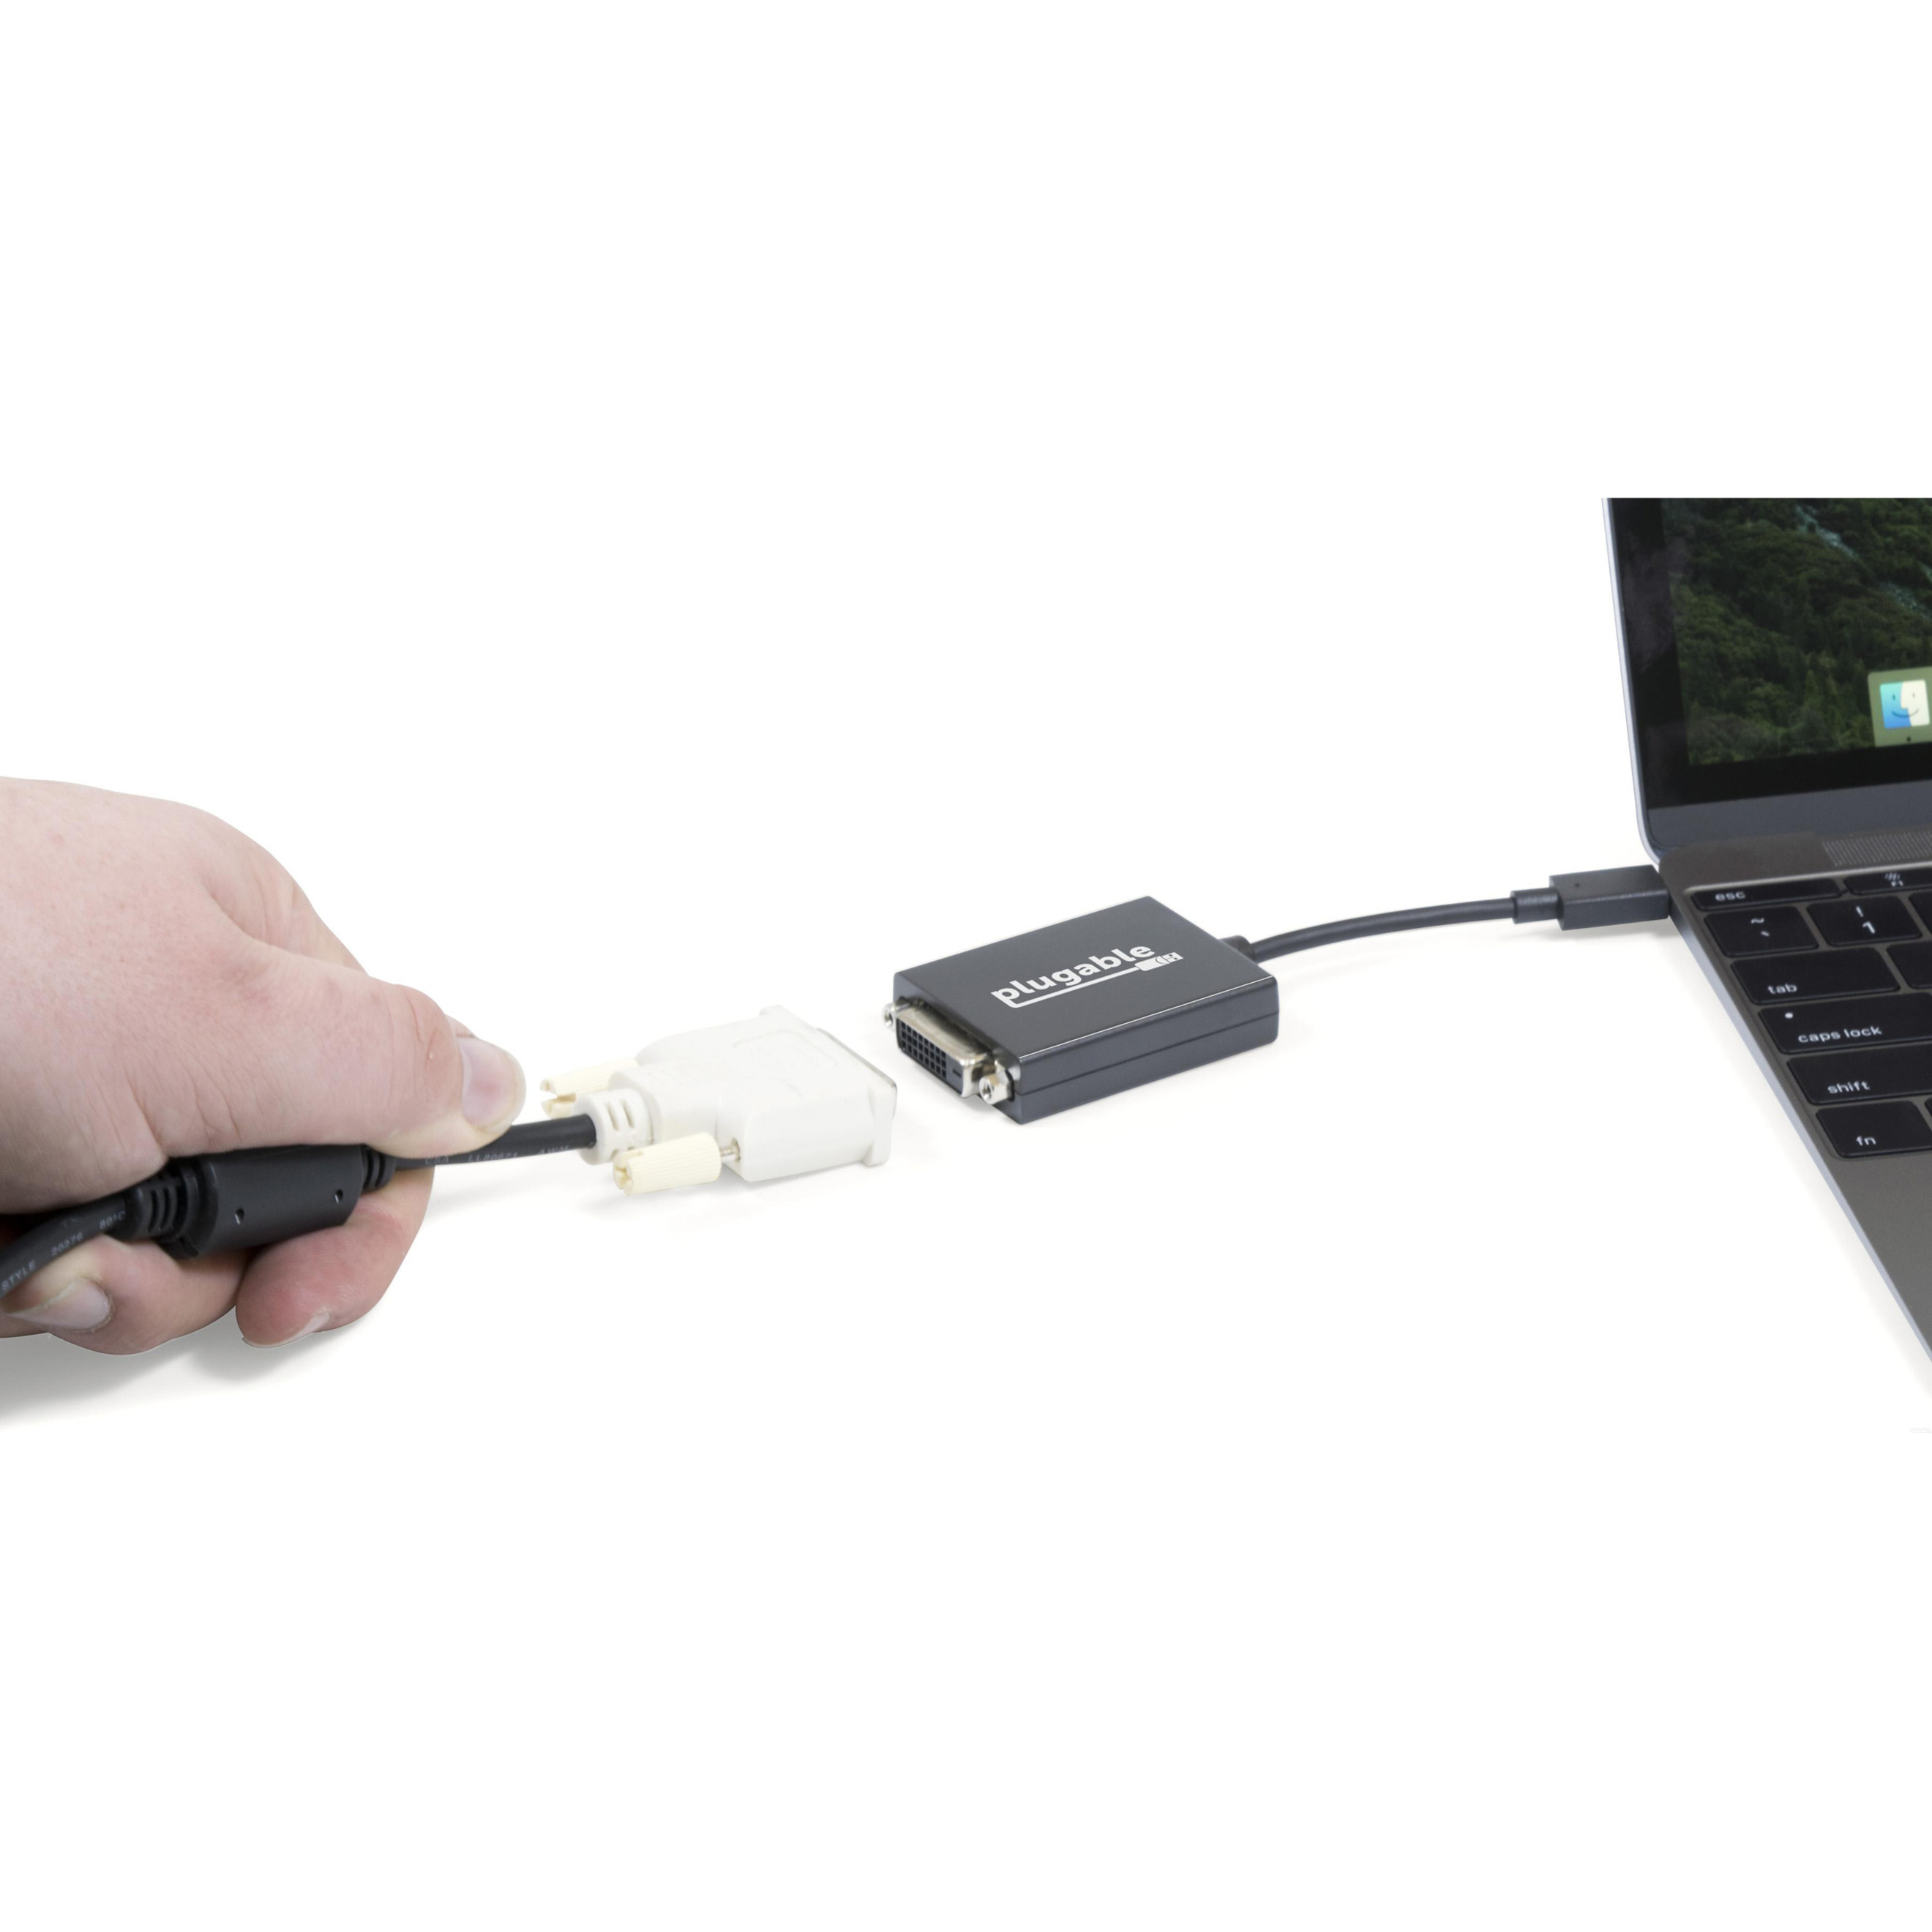 Plugable USB C to DVI Adapter - Connect Your USB-C Laptop to a DVI Display up to 1920x1200 - Compatible with 2017 and later Mac and Windows PCs - image 5 of 5